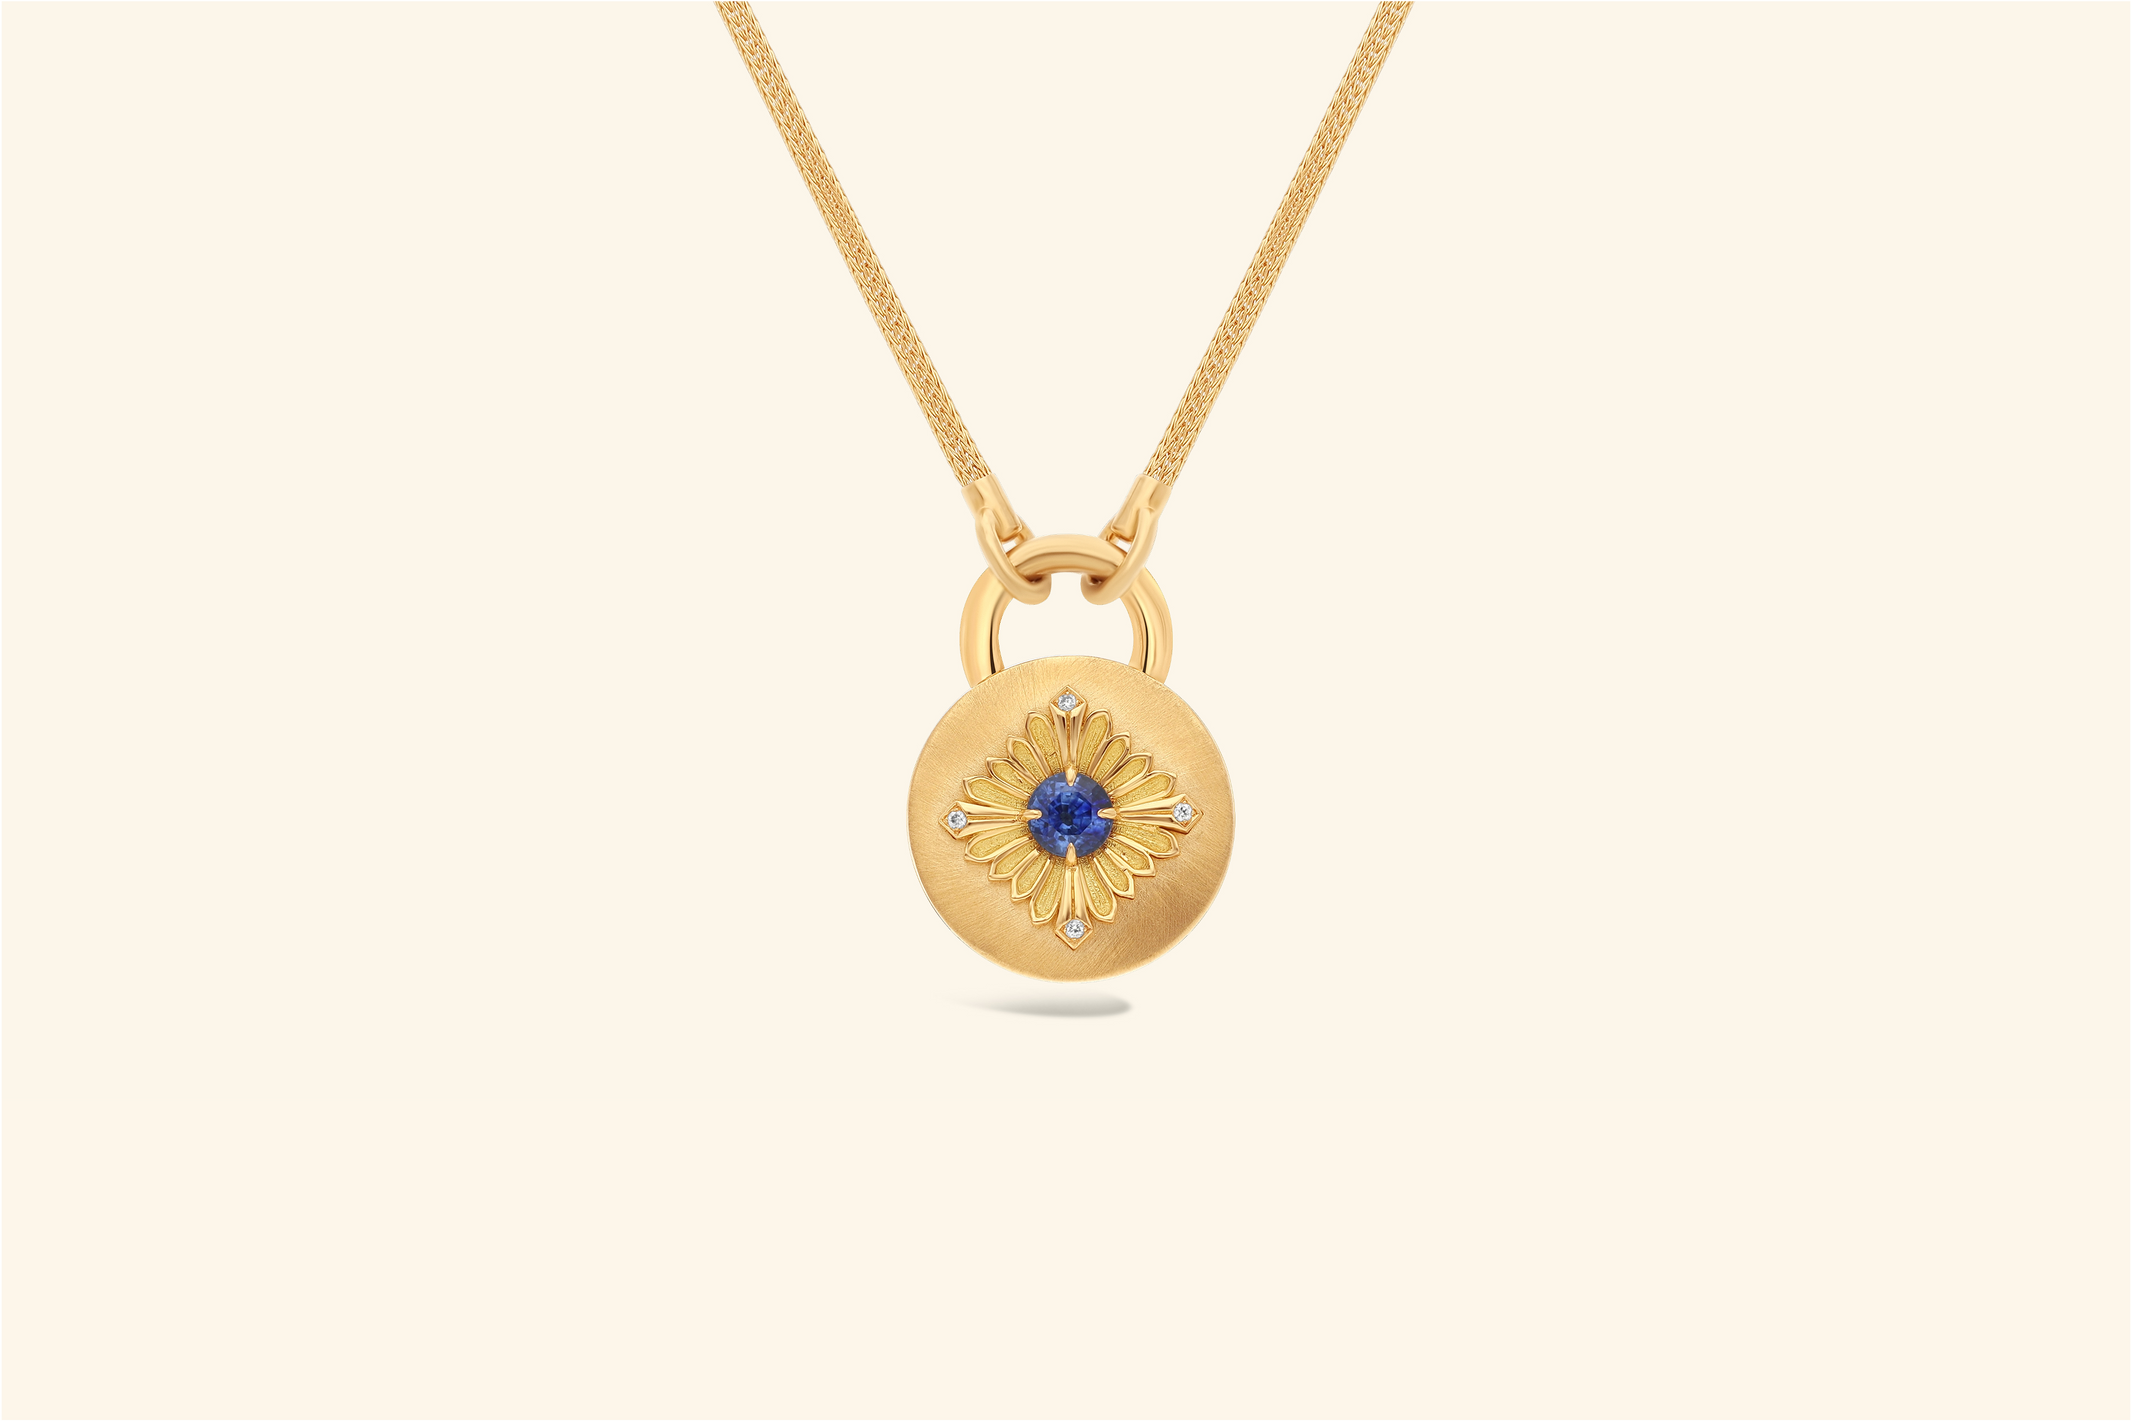 Tag necklace, yellow gold, diamonds, sapphire